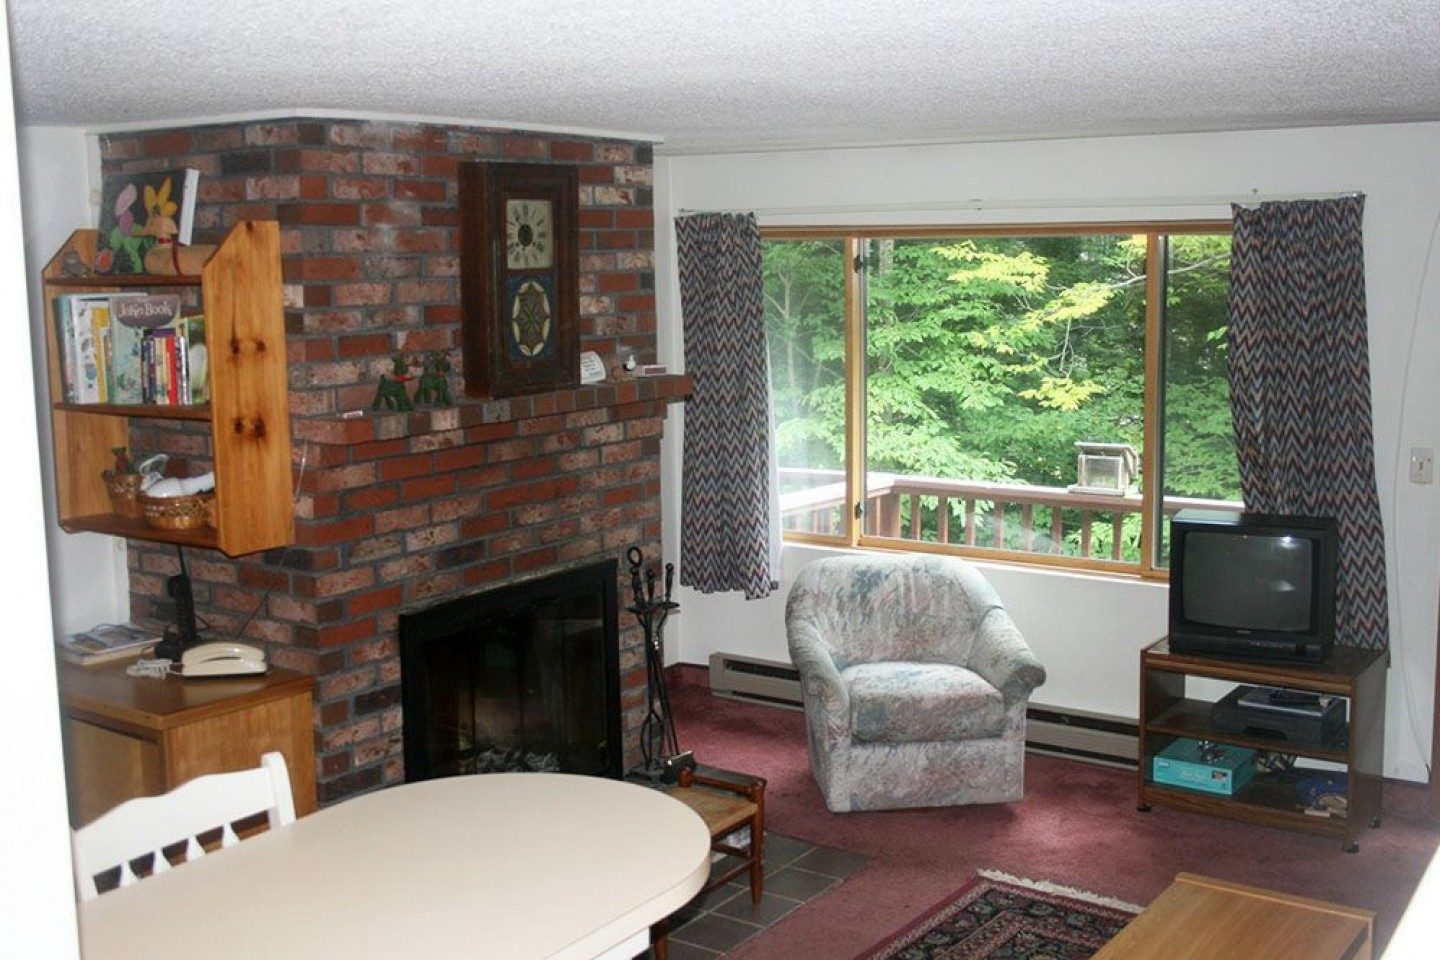 South Ridge H - Living area with fireplace